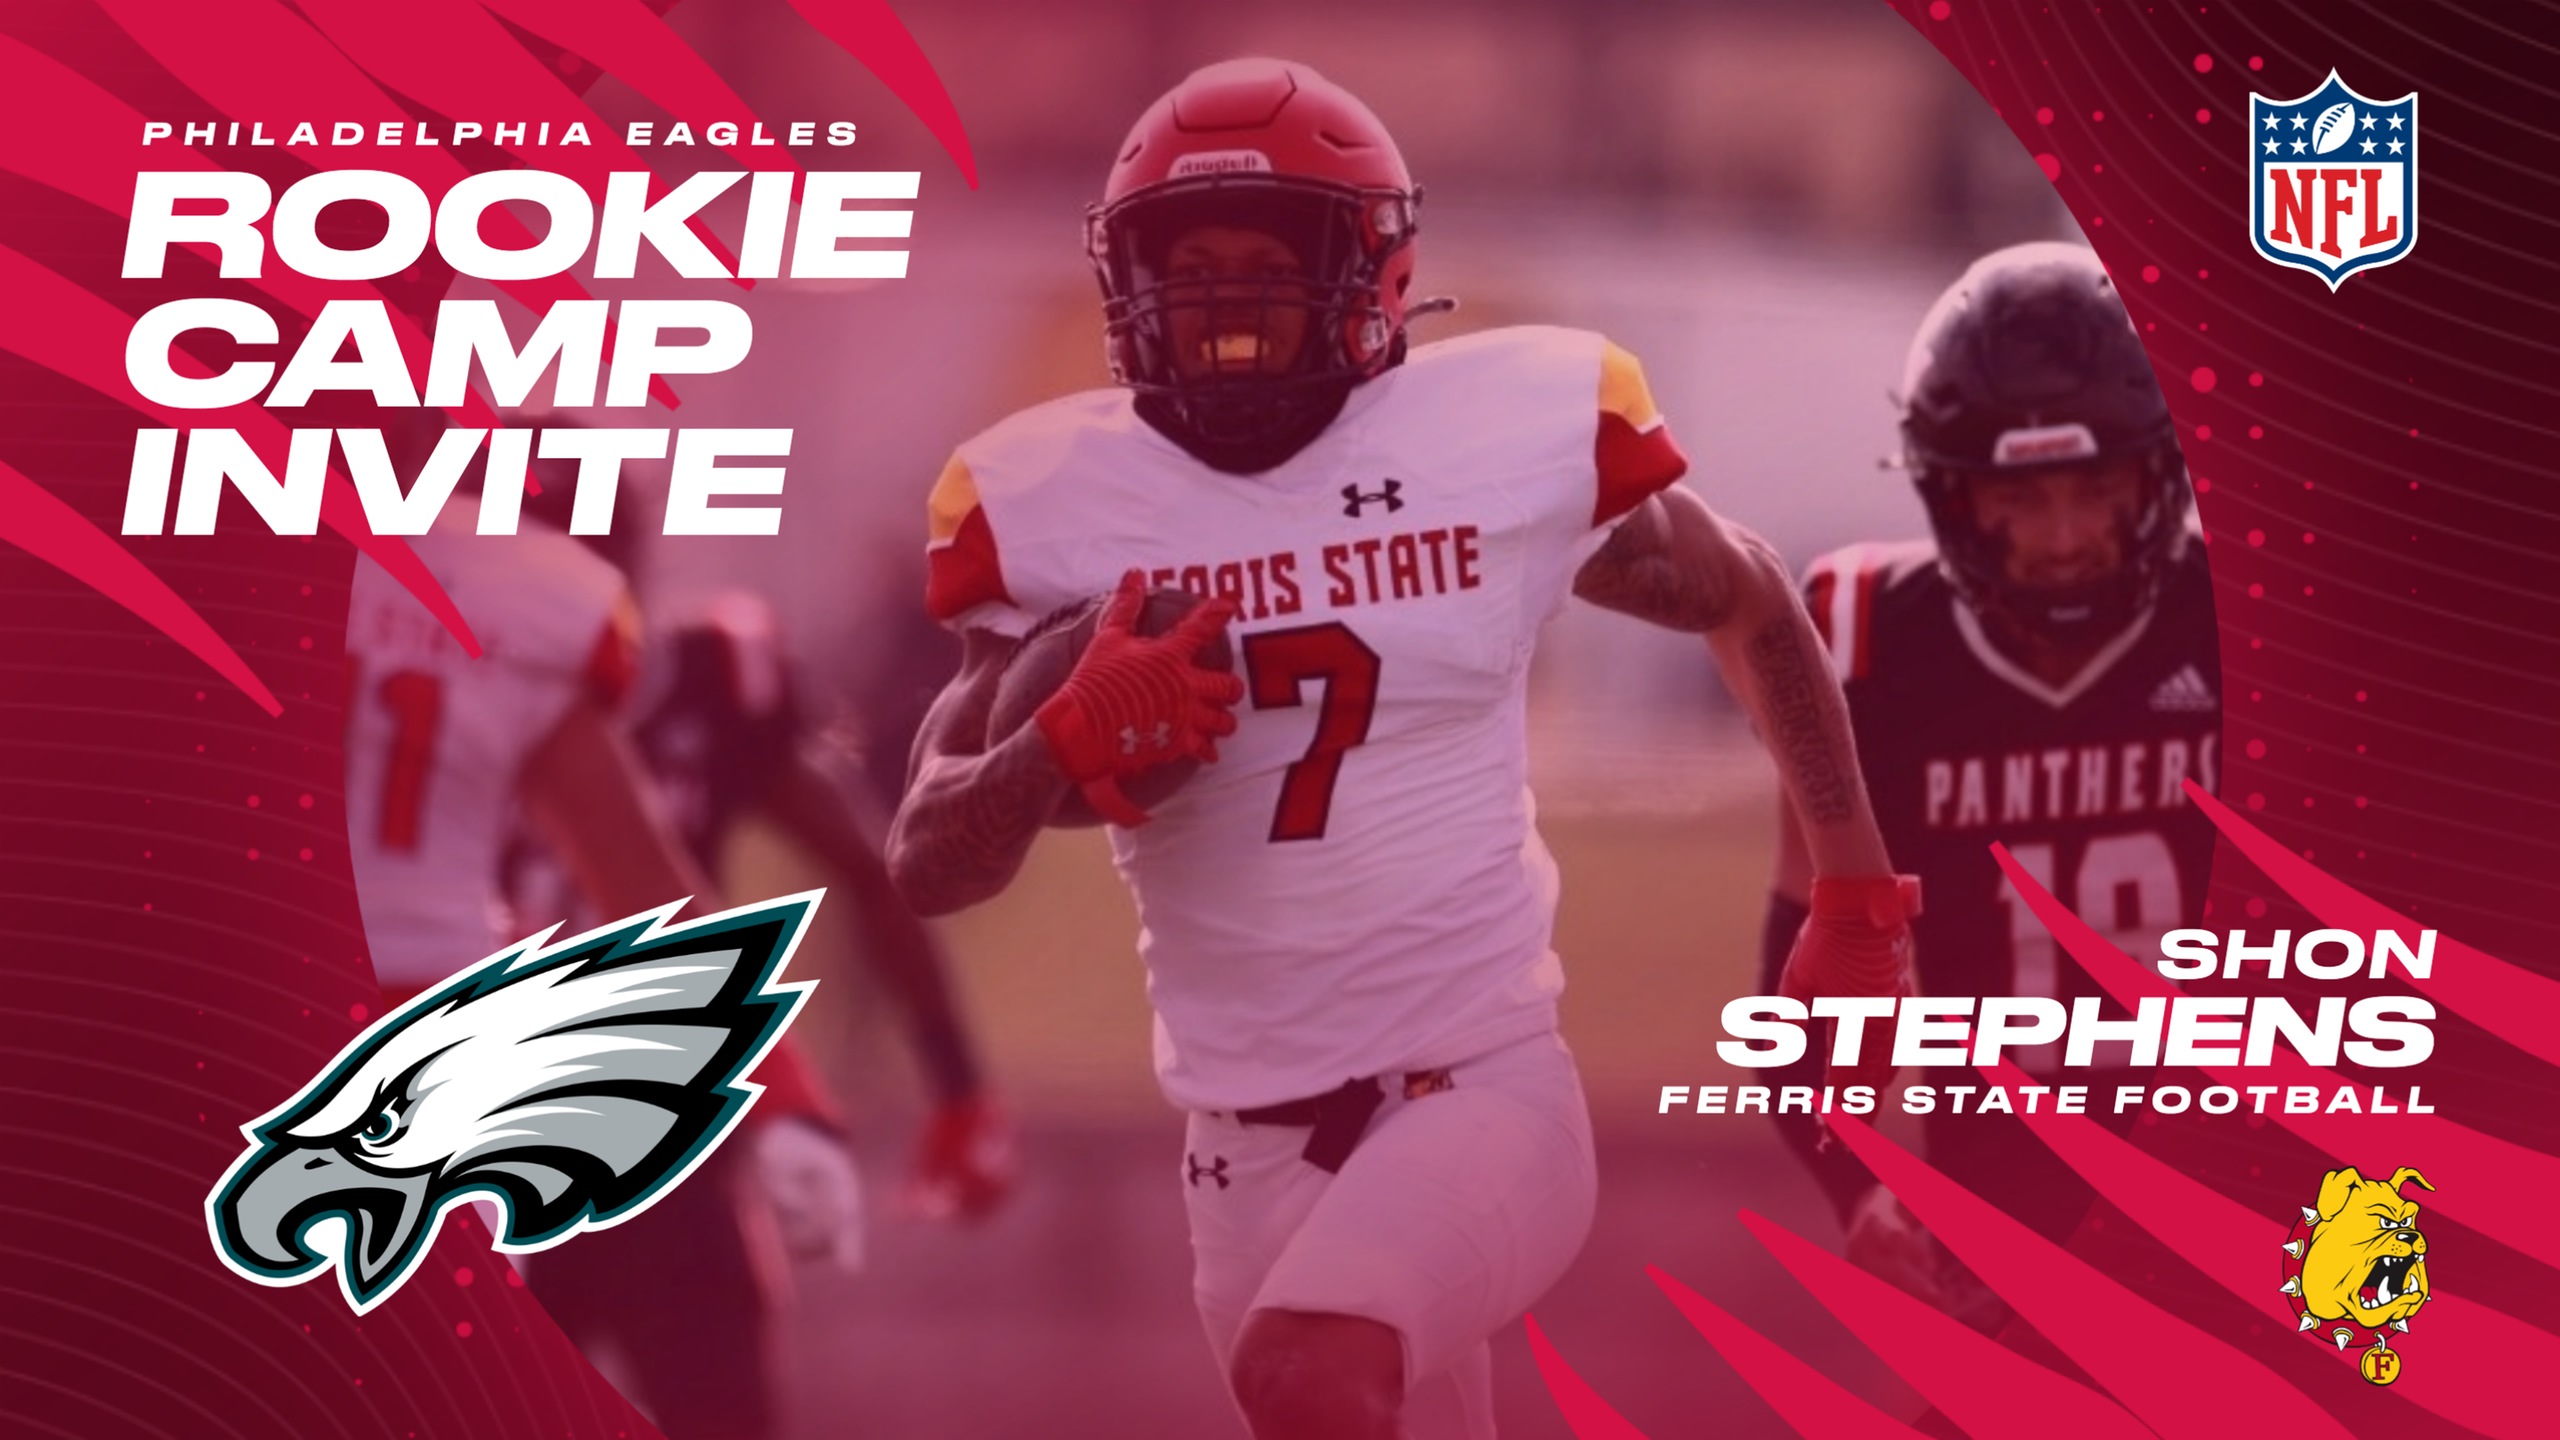 Ferris State's Shon Stephens Earns NFL Rookie Camp Invite From Philadelphia Eagles